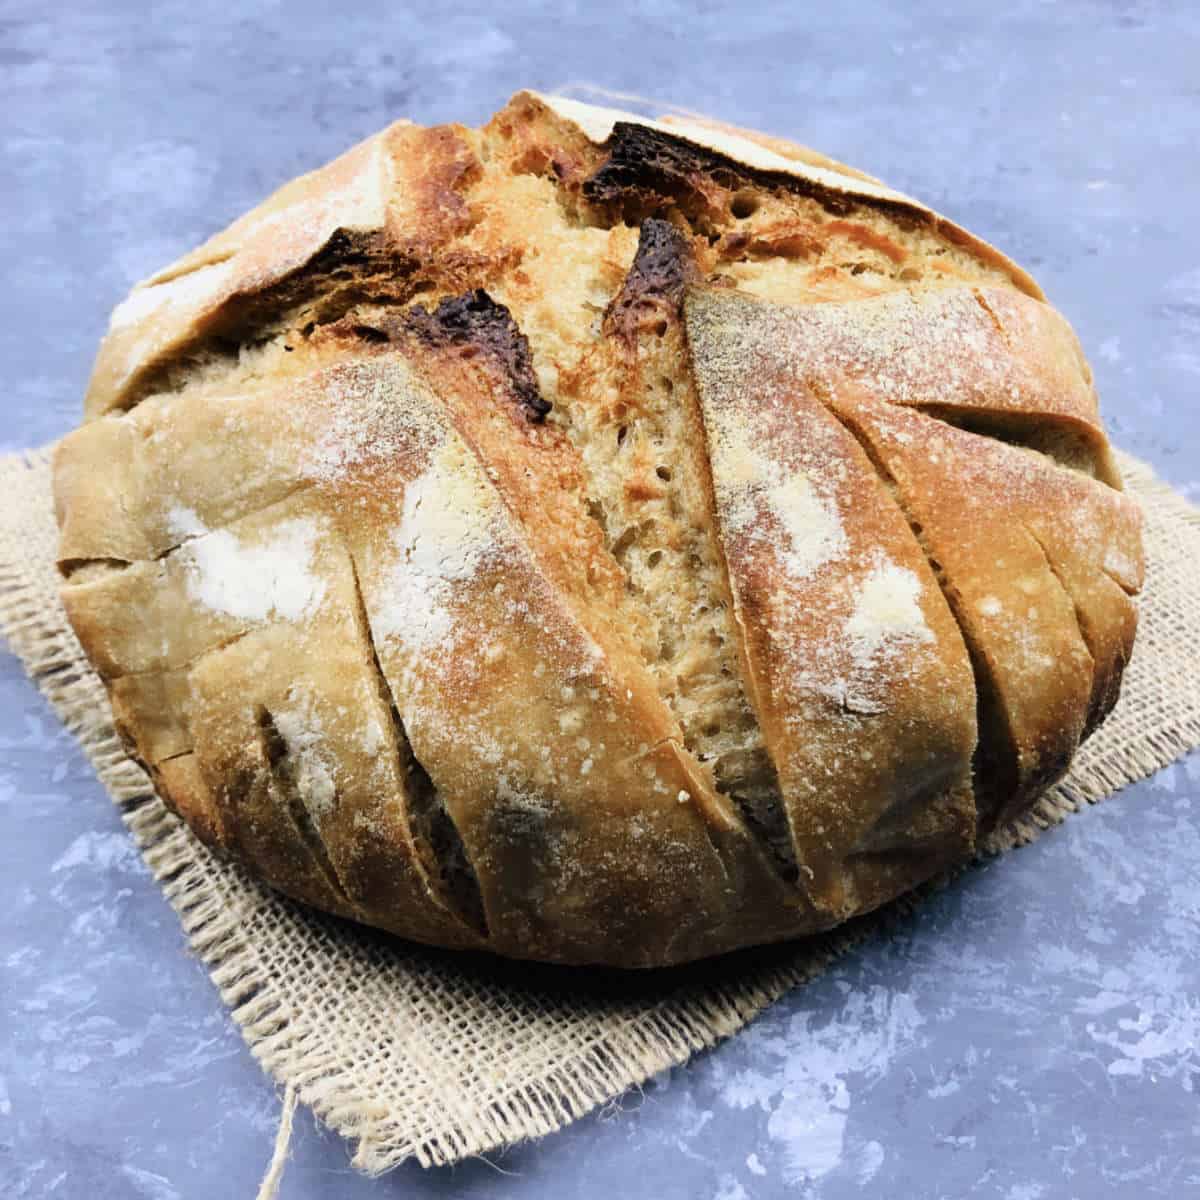 Perfectly baked whole wheat sourdough bread.